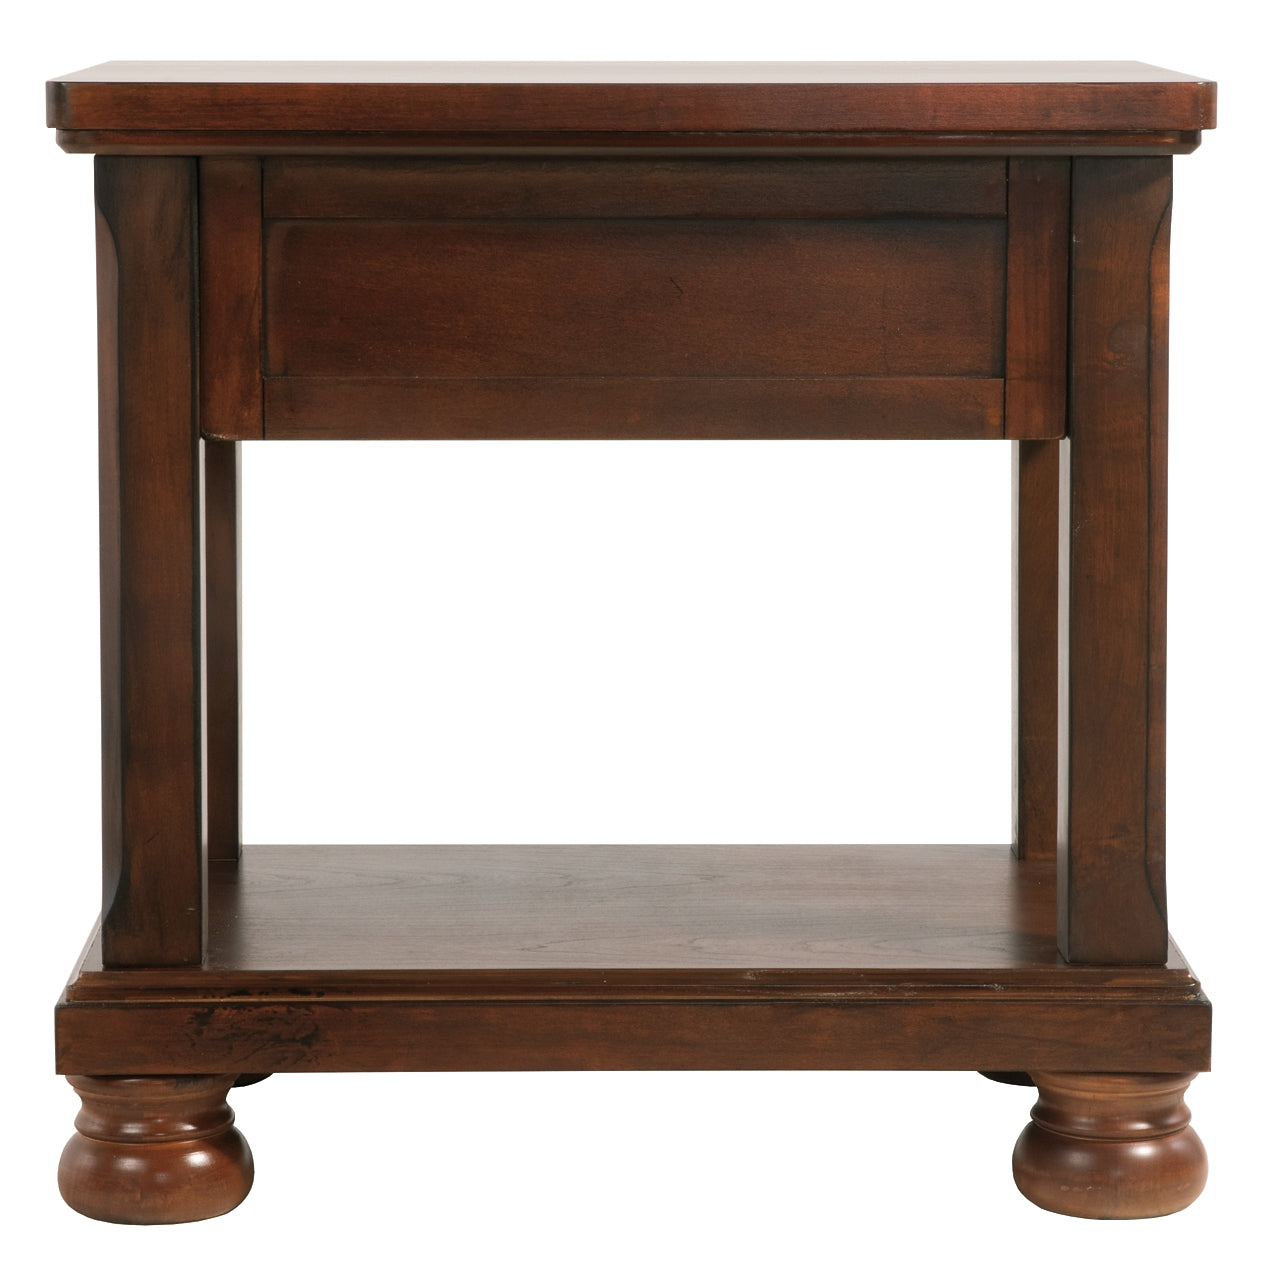 Ashley Express - Porter Chair Side End Table